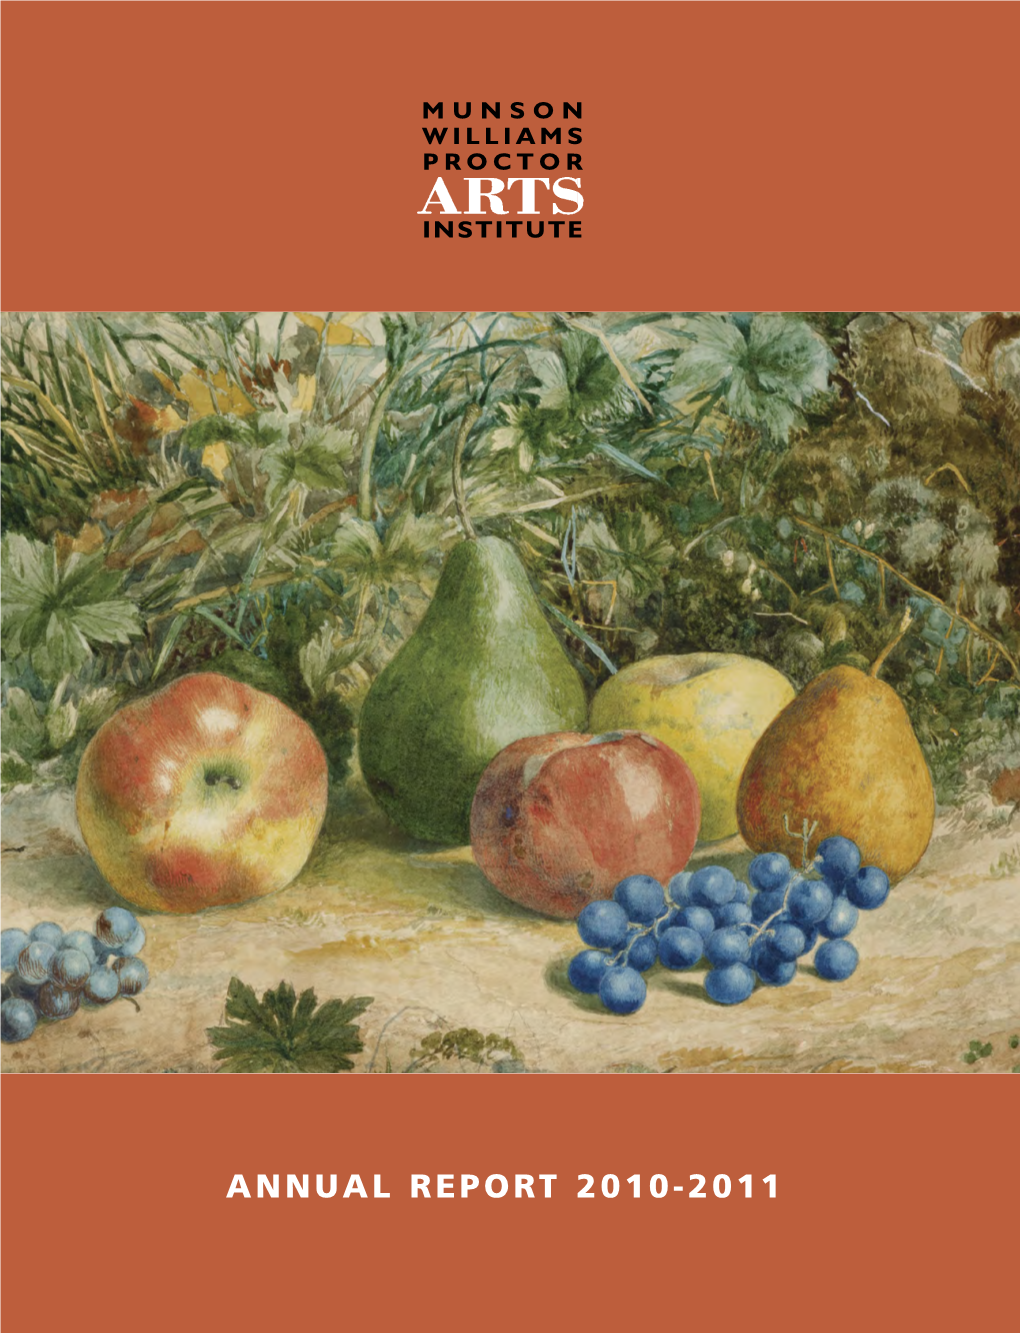 ANNUAL REPORT 2010-2011 Cover: John William Hill, American (1812-79) Still Life with Fruit, 1866 the MUNSON-WILLIAMS-PROCTOR ARTS INSTITUTE’S MISSION IS